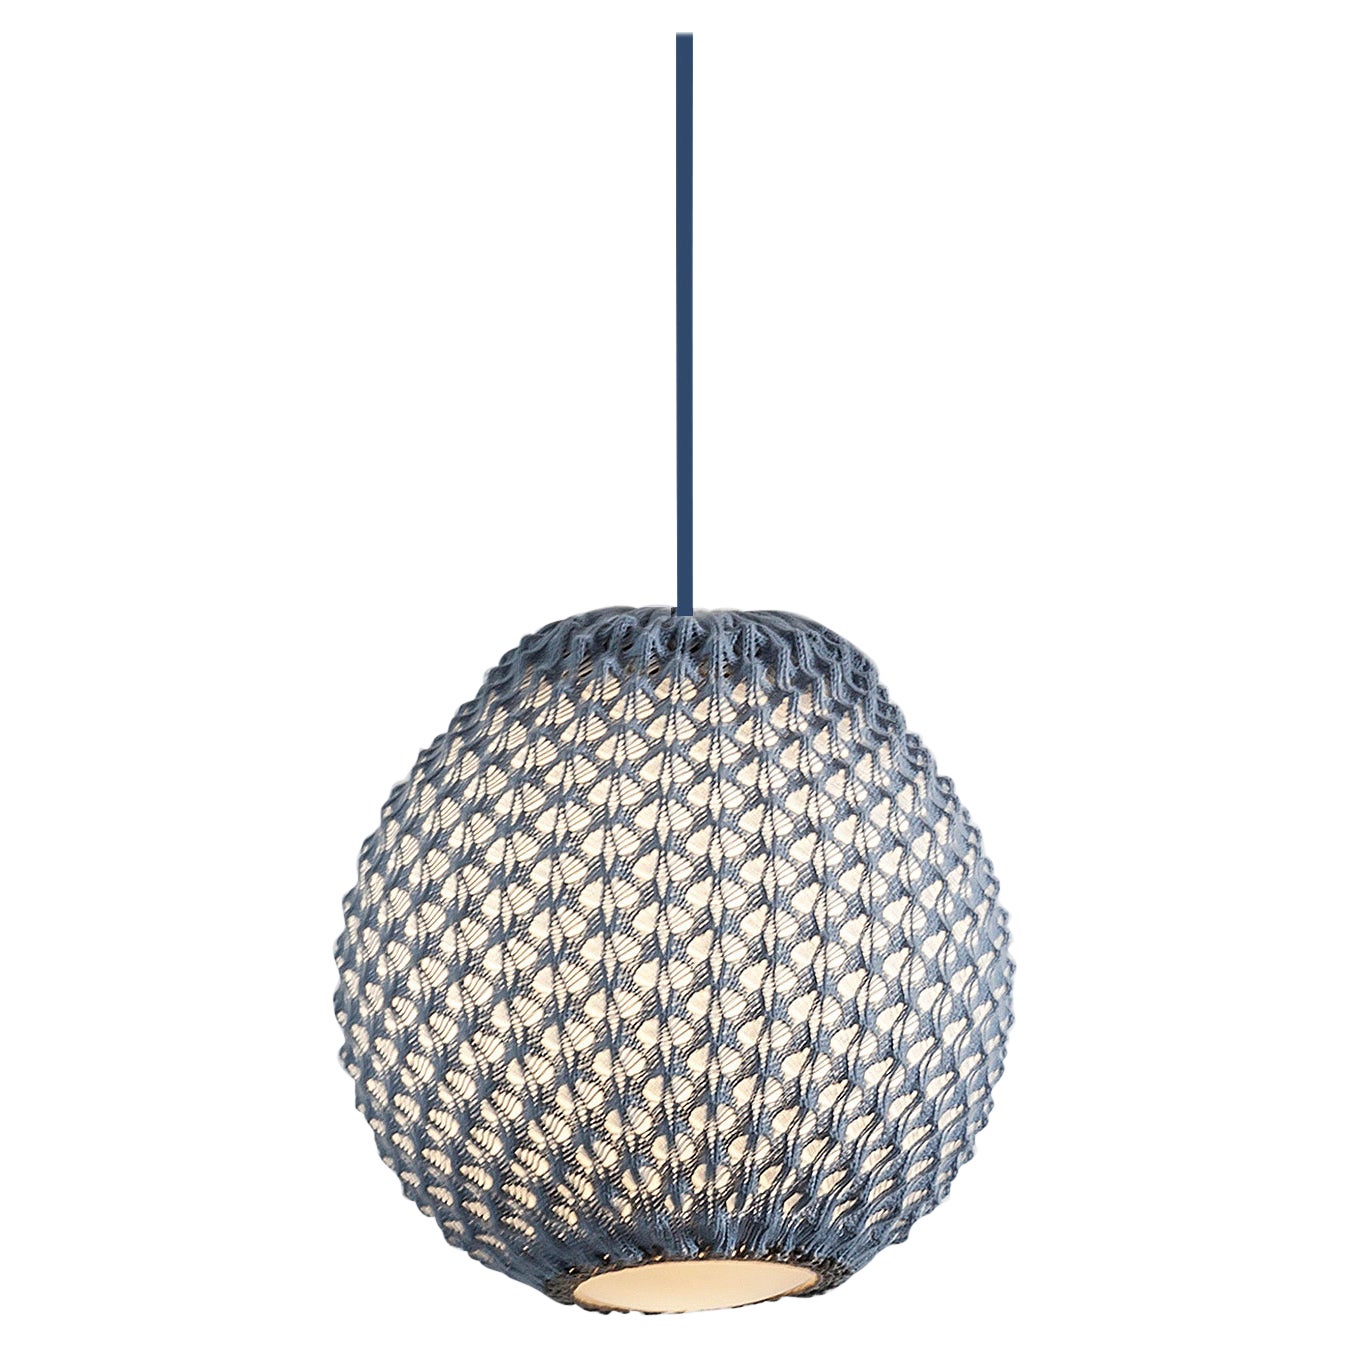 Knitted Lighting Fixture  - Pendant  - Small size 30cm